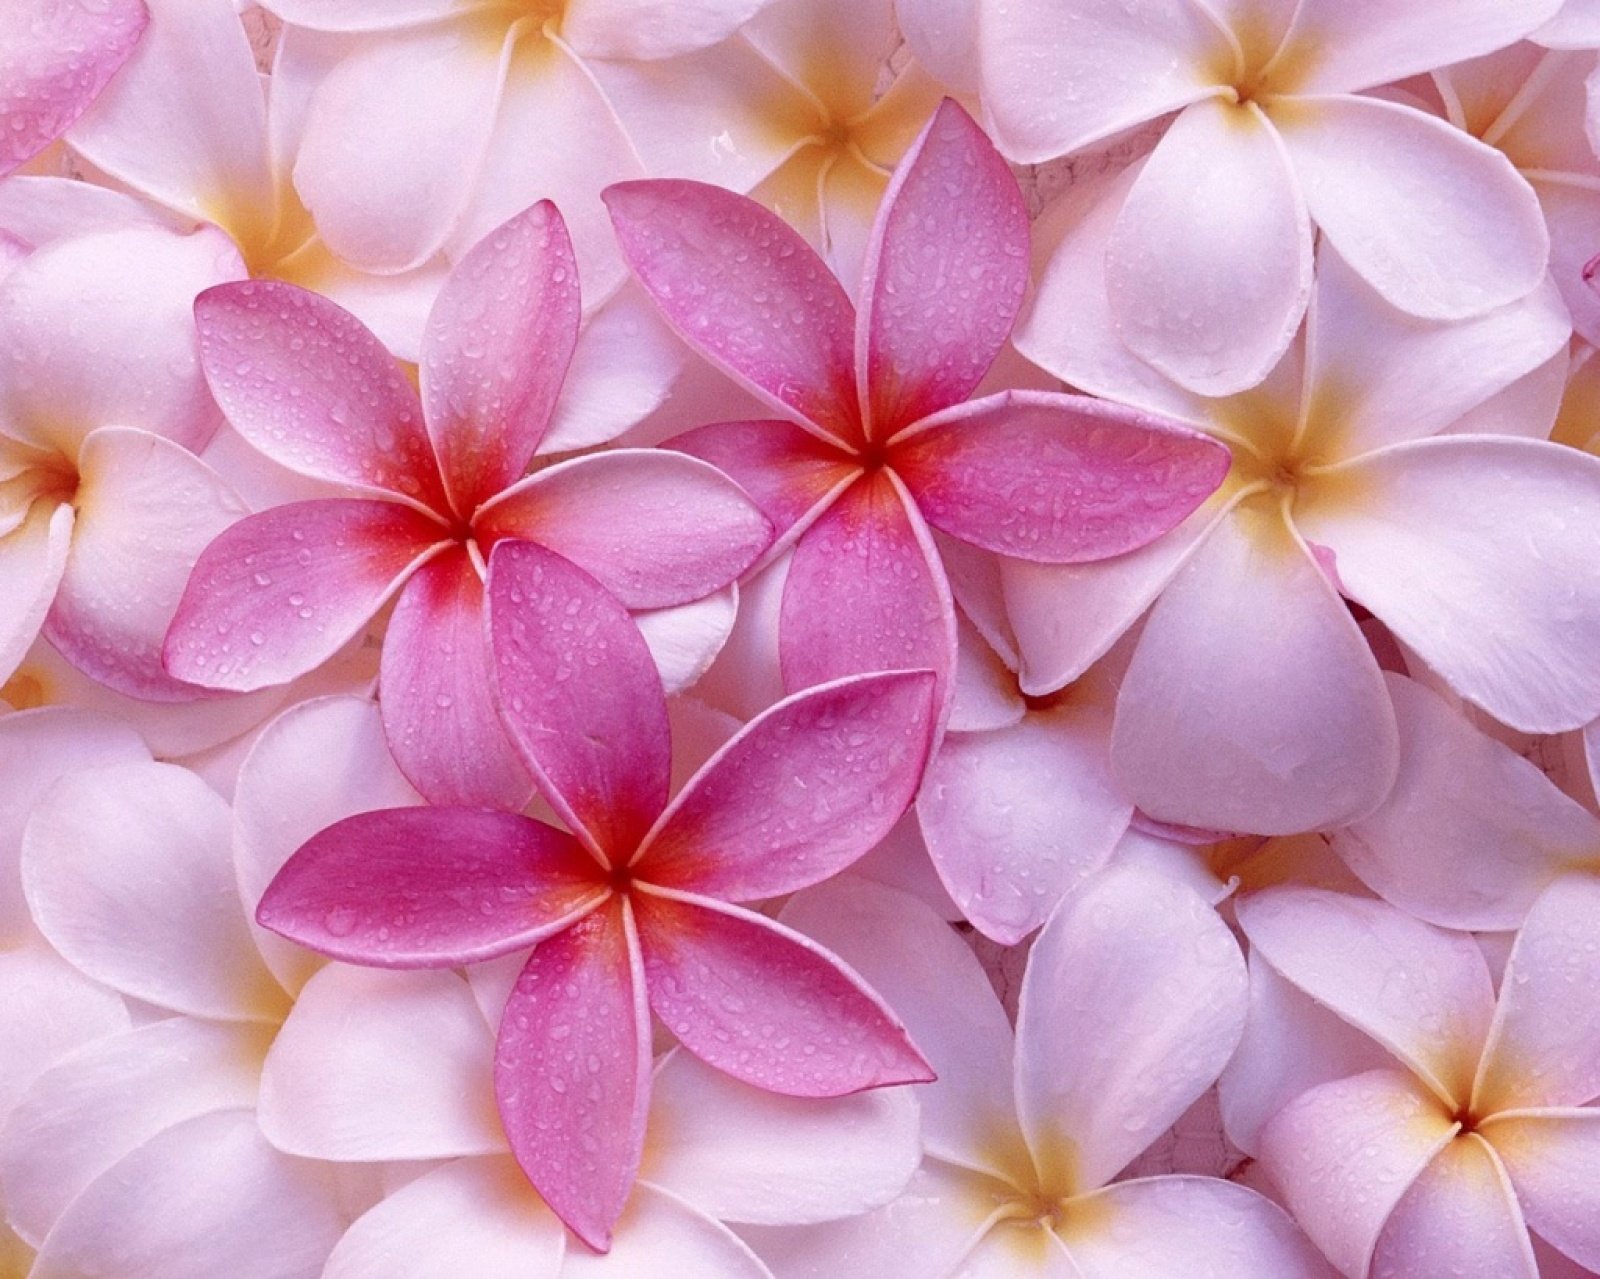 Pink Spring Flowers Wallpapers   8723 1600x1279